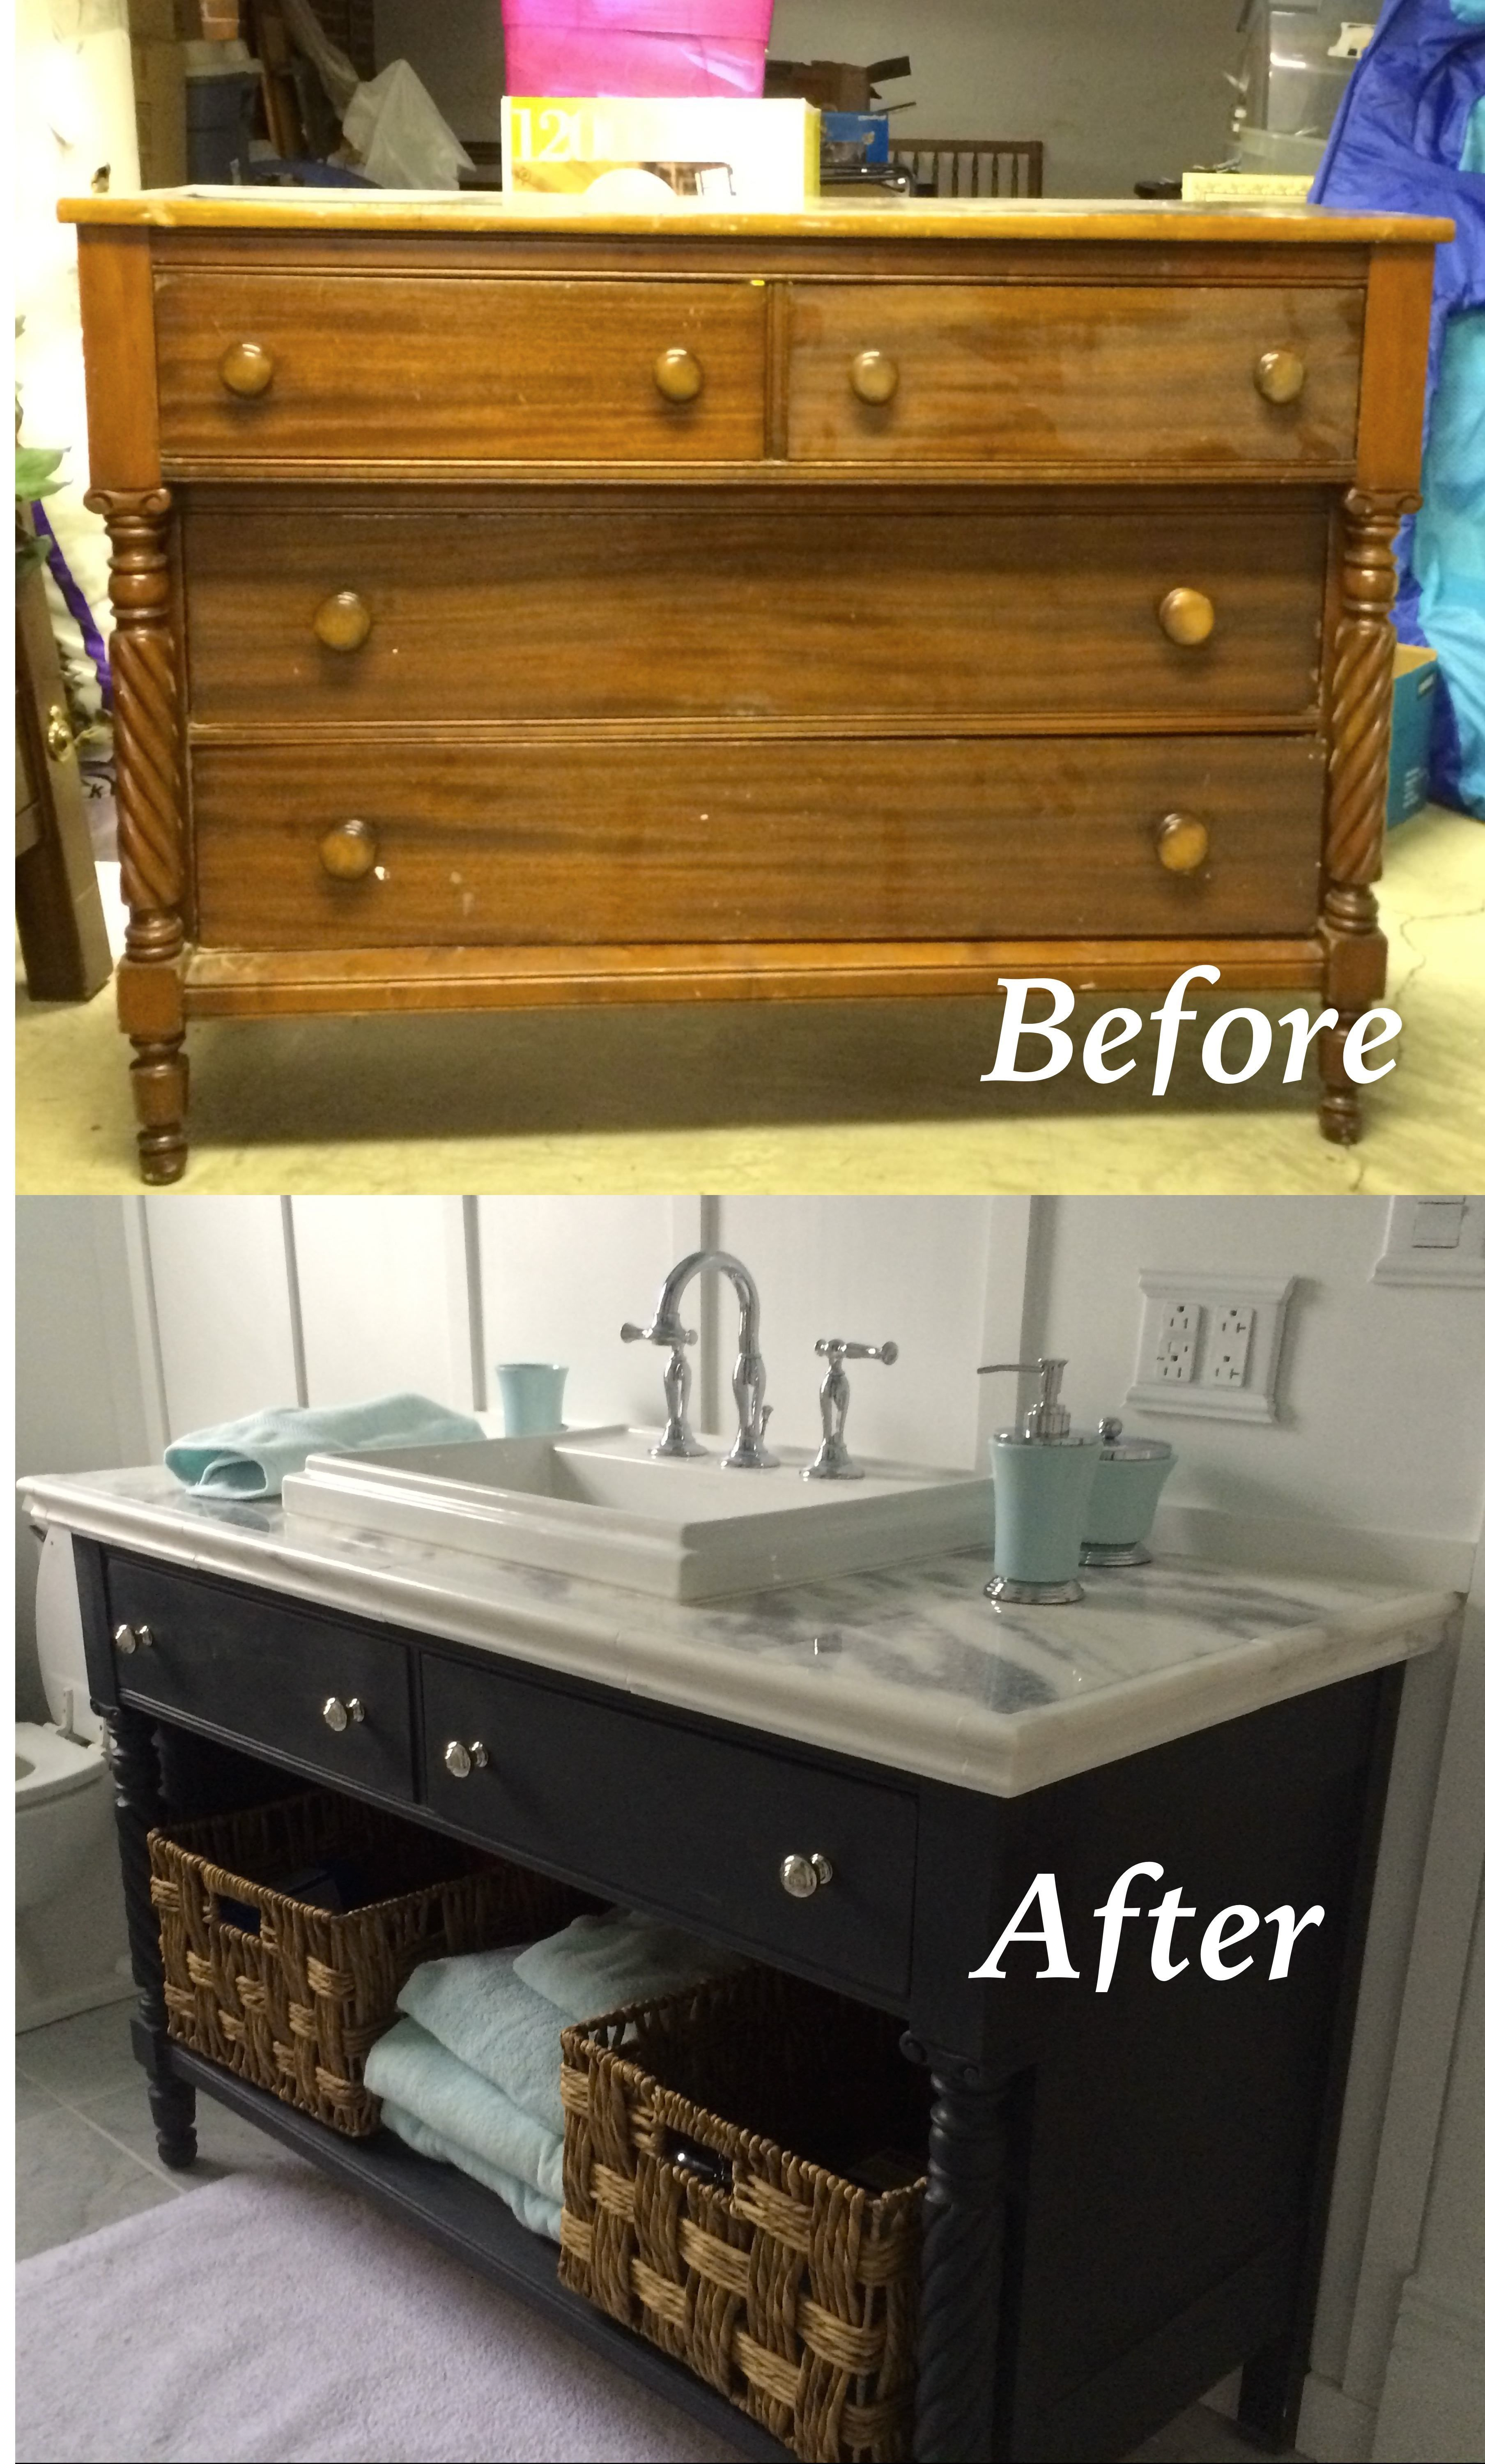 Re Do Of An Old Dresser Into A Bathroom Vanity Painted With Chalk in dimensions 3616 X 6000